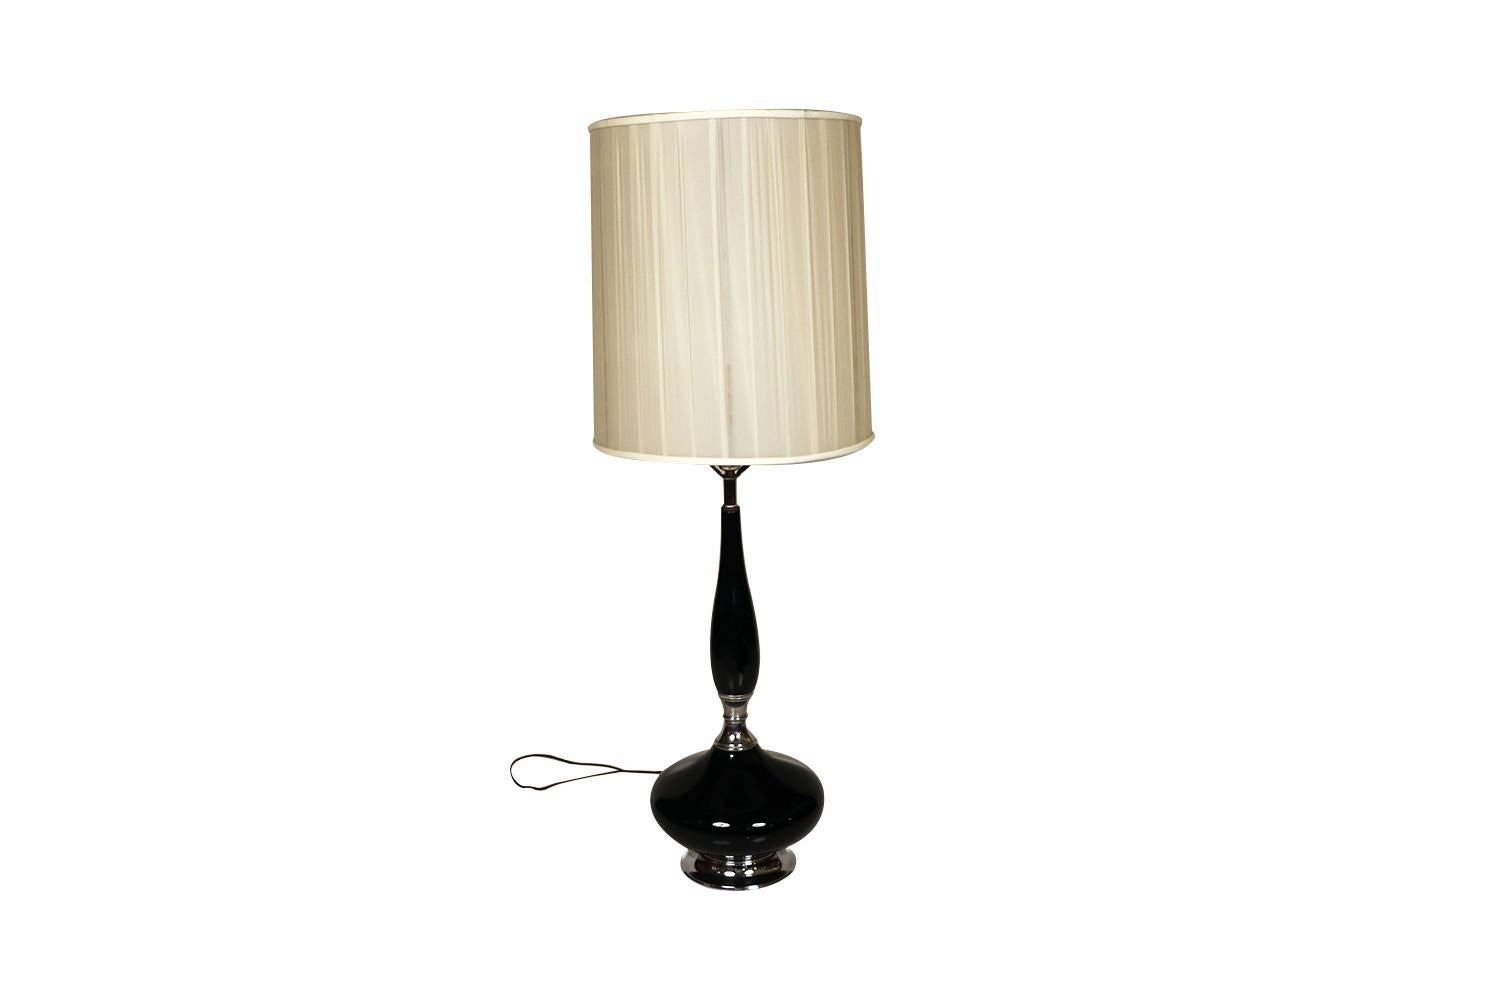 This is a stunning and very sought after midcentury, Hollywood Regency, ceramic table lamp with an elongated neck, over bulbous form, raised on a chrome base, finished off with this beautiful drum lampshade included, featuring a vibrant shiny black